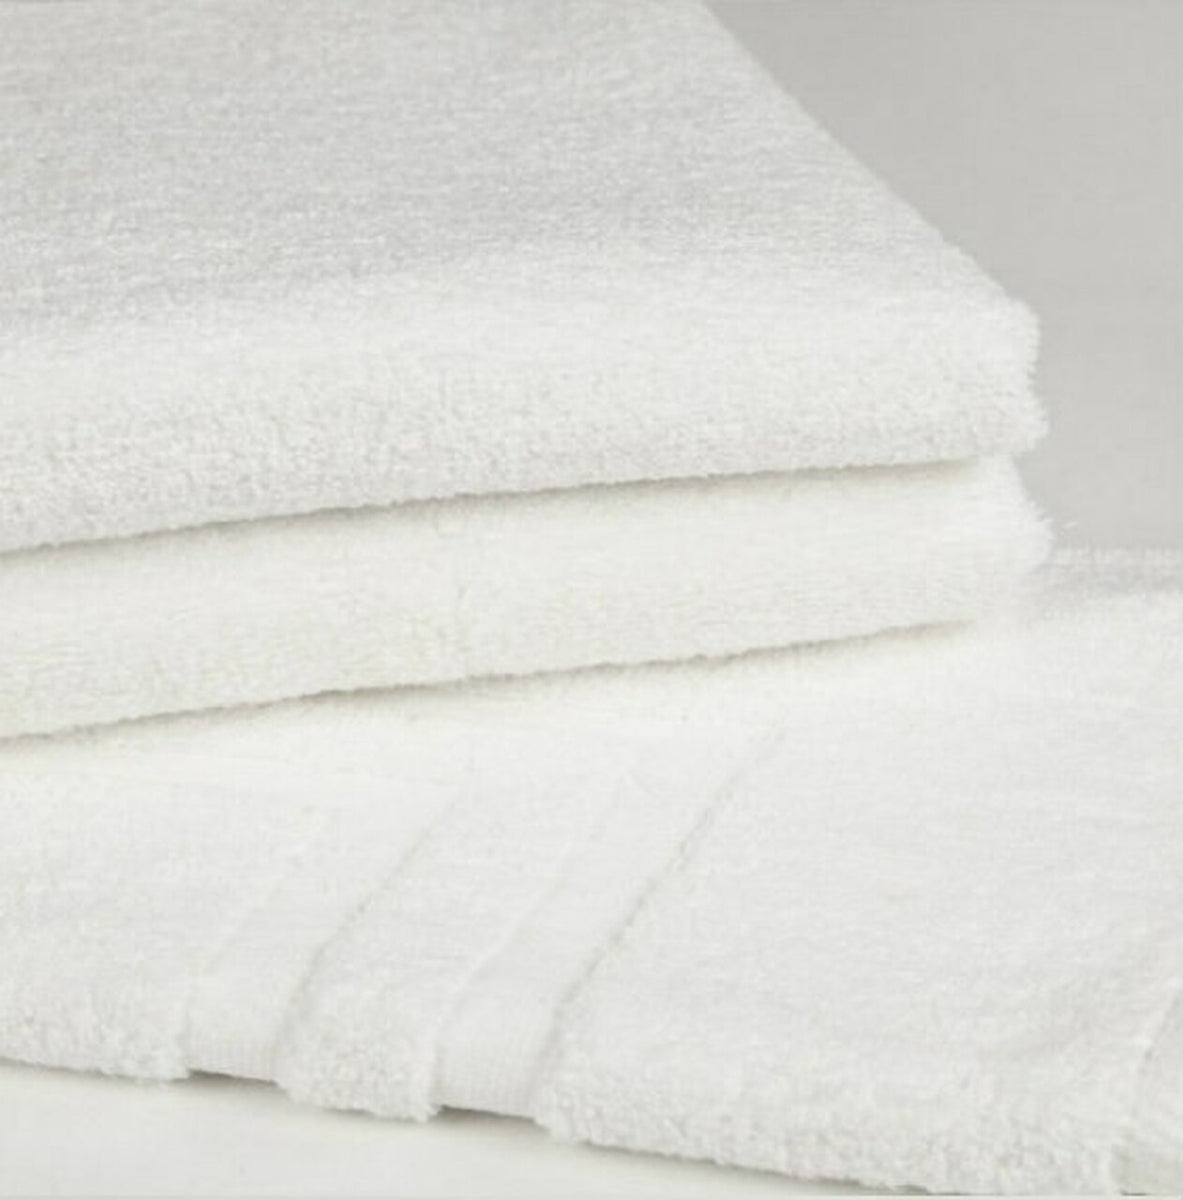 Lot Of 12 Manchester Mills White 24x50 Bath Towels 86% Cotton